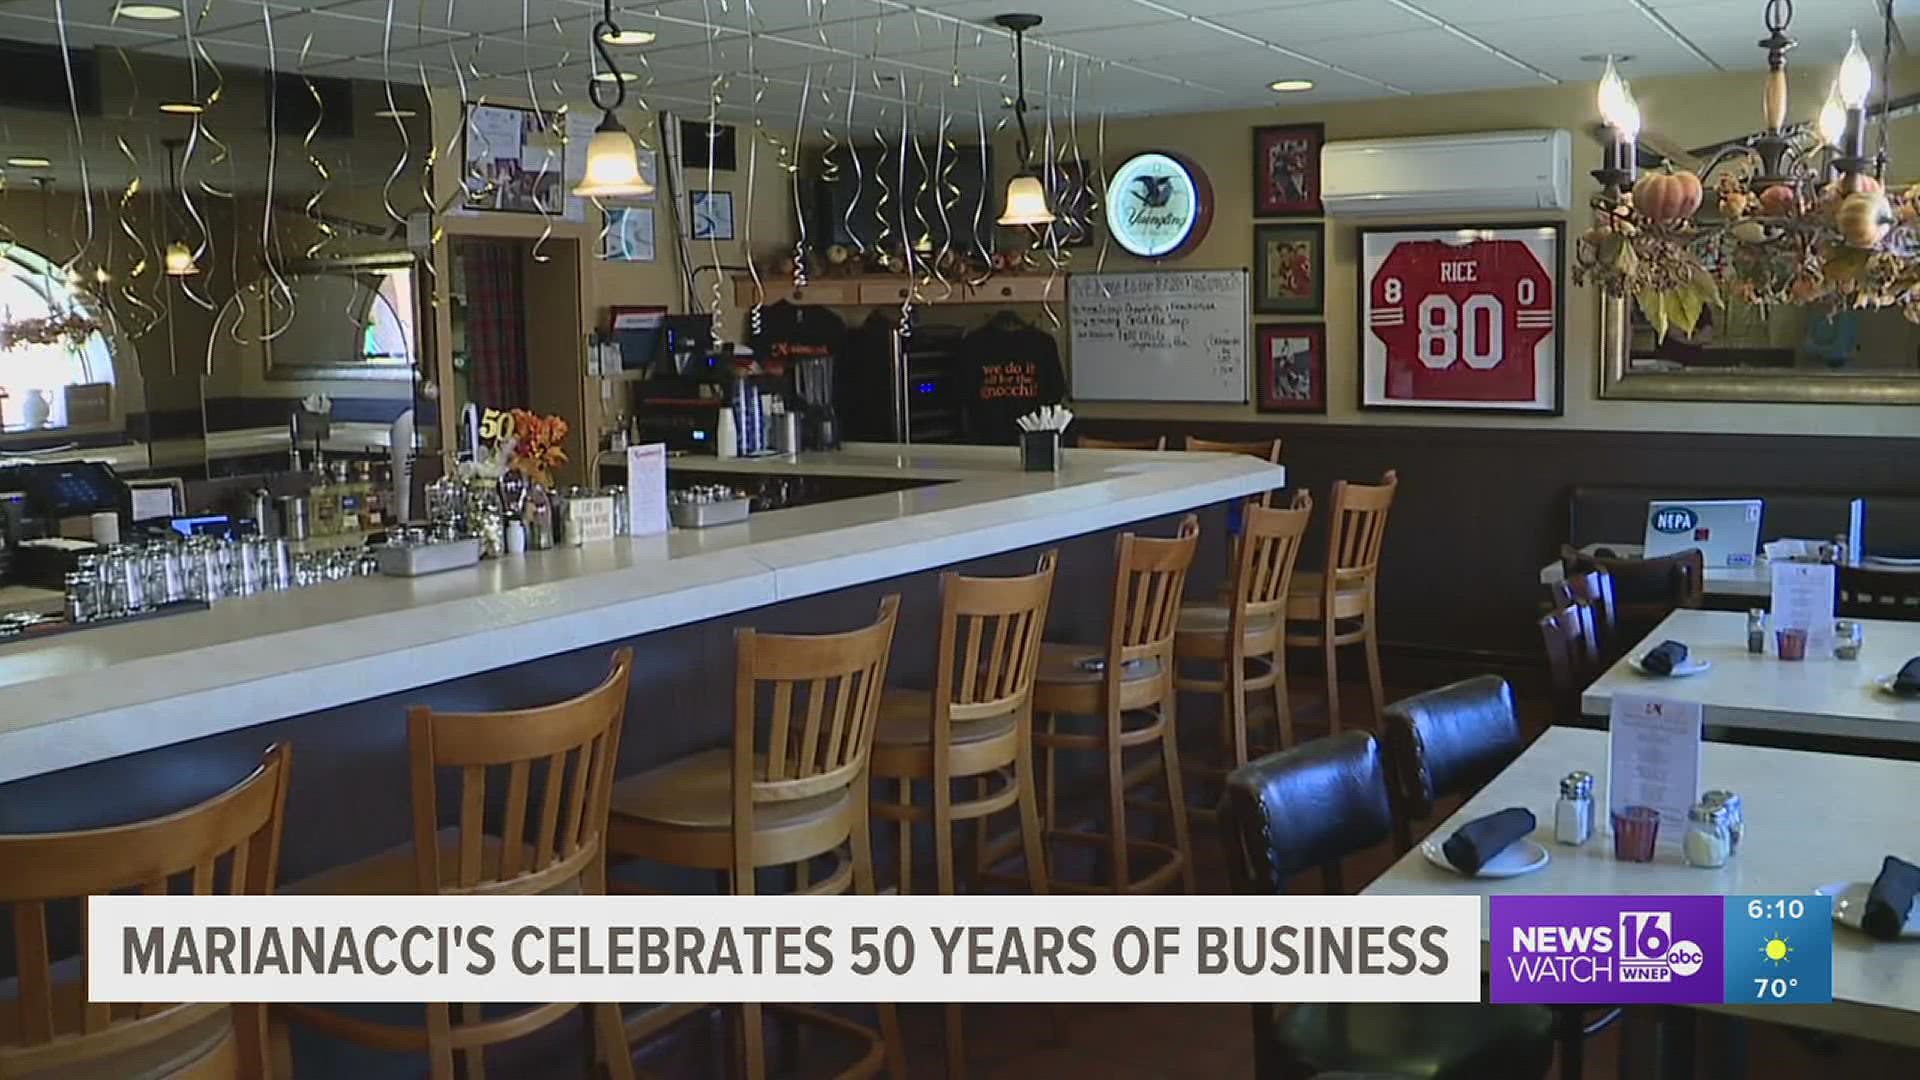 The Italian restaurant touts work ethic and loyal customers for continued success.